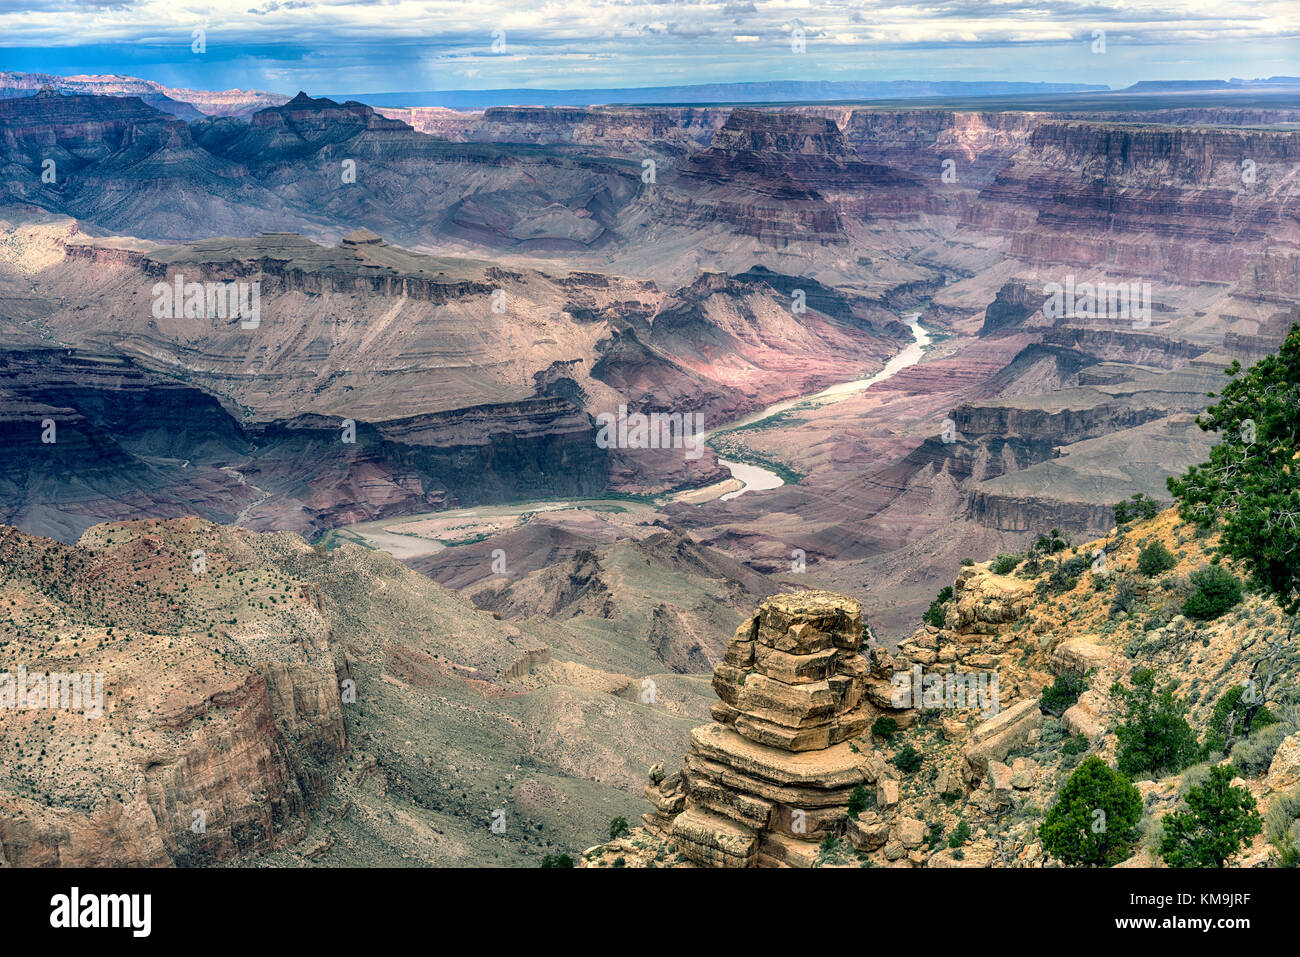 Grand Canyon National Park Arizona landscape view with the Colorado River in the distance. Layered bands of red rock revealing millions of years of ge Stock Photo